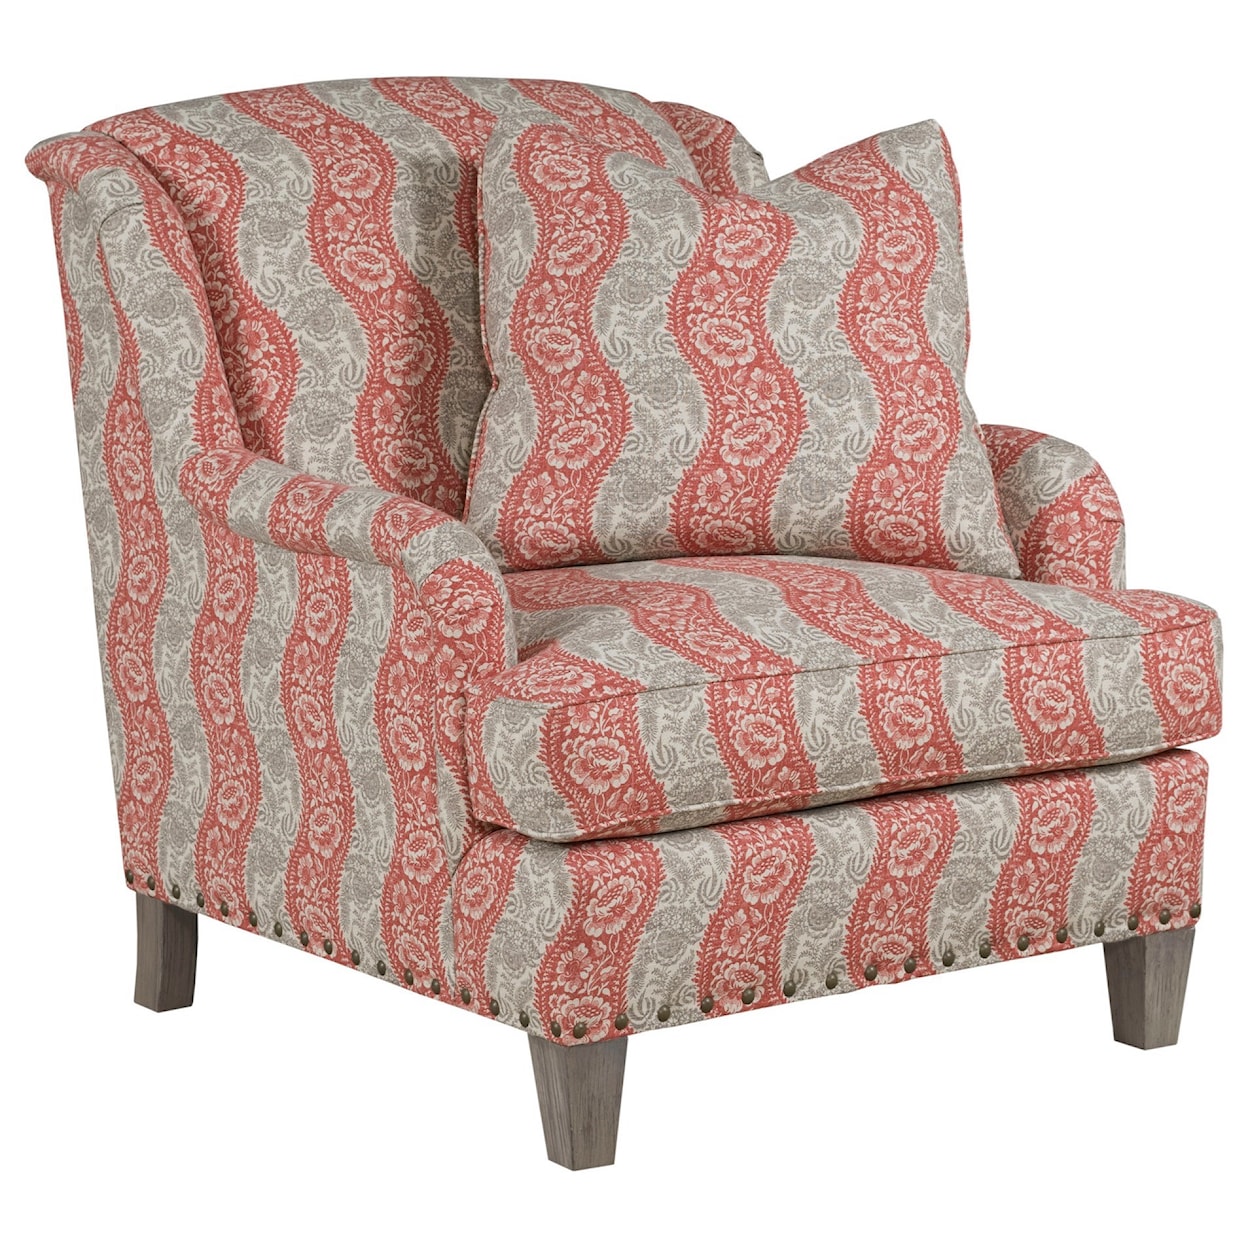 Kincaid Furniture Tuesday Tuesday Upholstered Chair